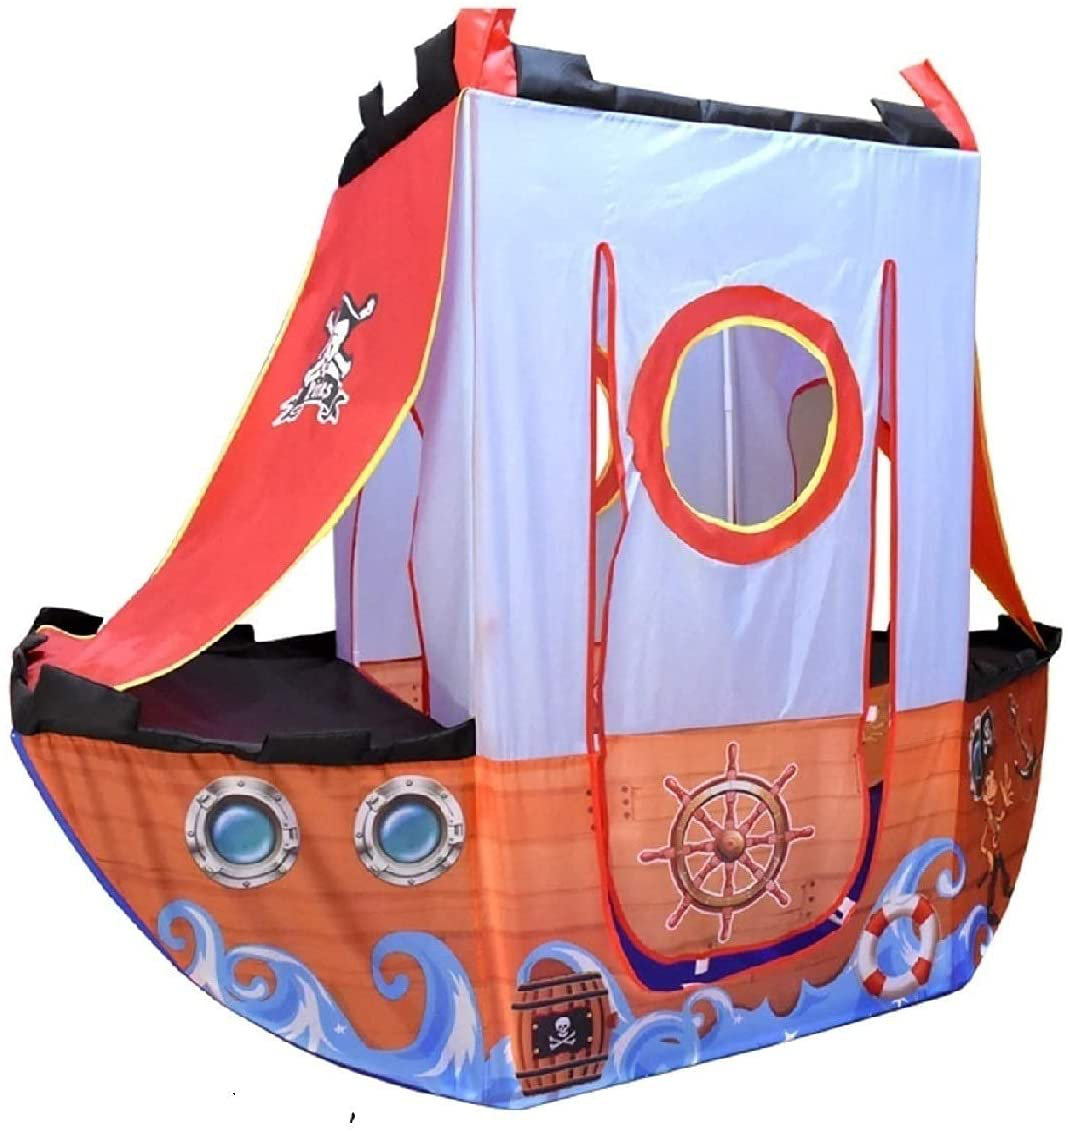 Balls Included Pirate Ship Indoor & Outdoor Childrens Playhouse Ball Pit Pop Up Play Tent